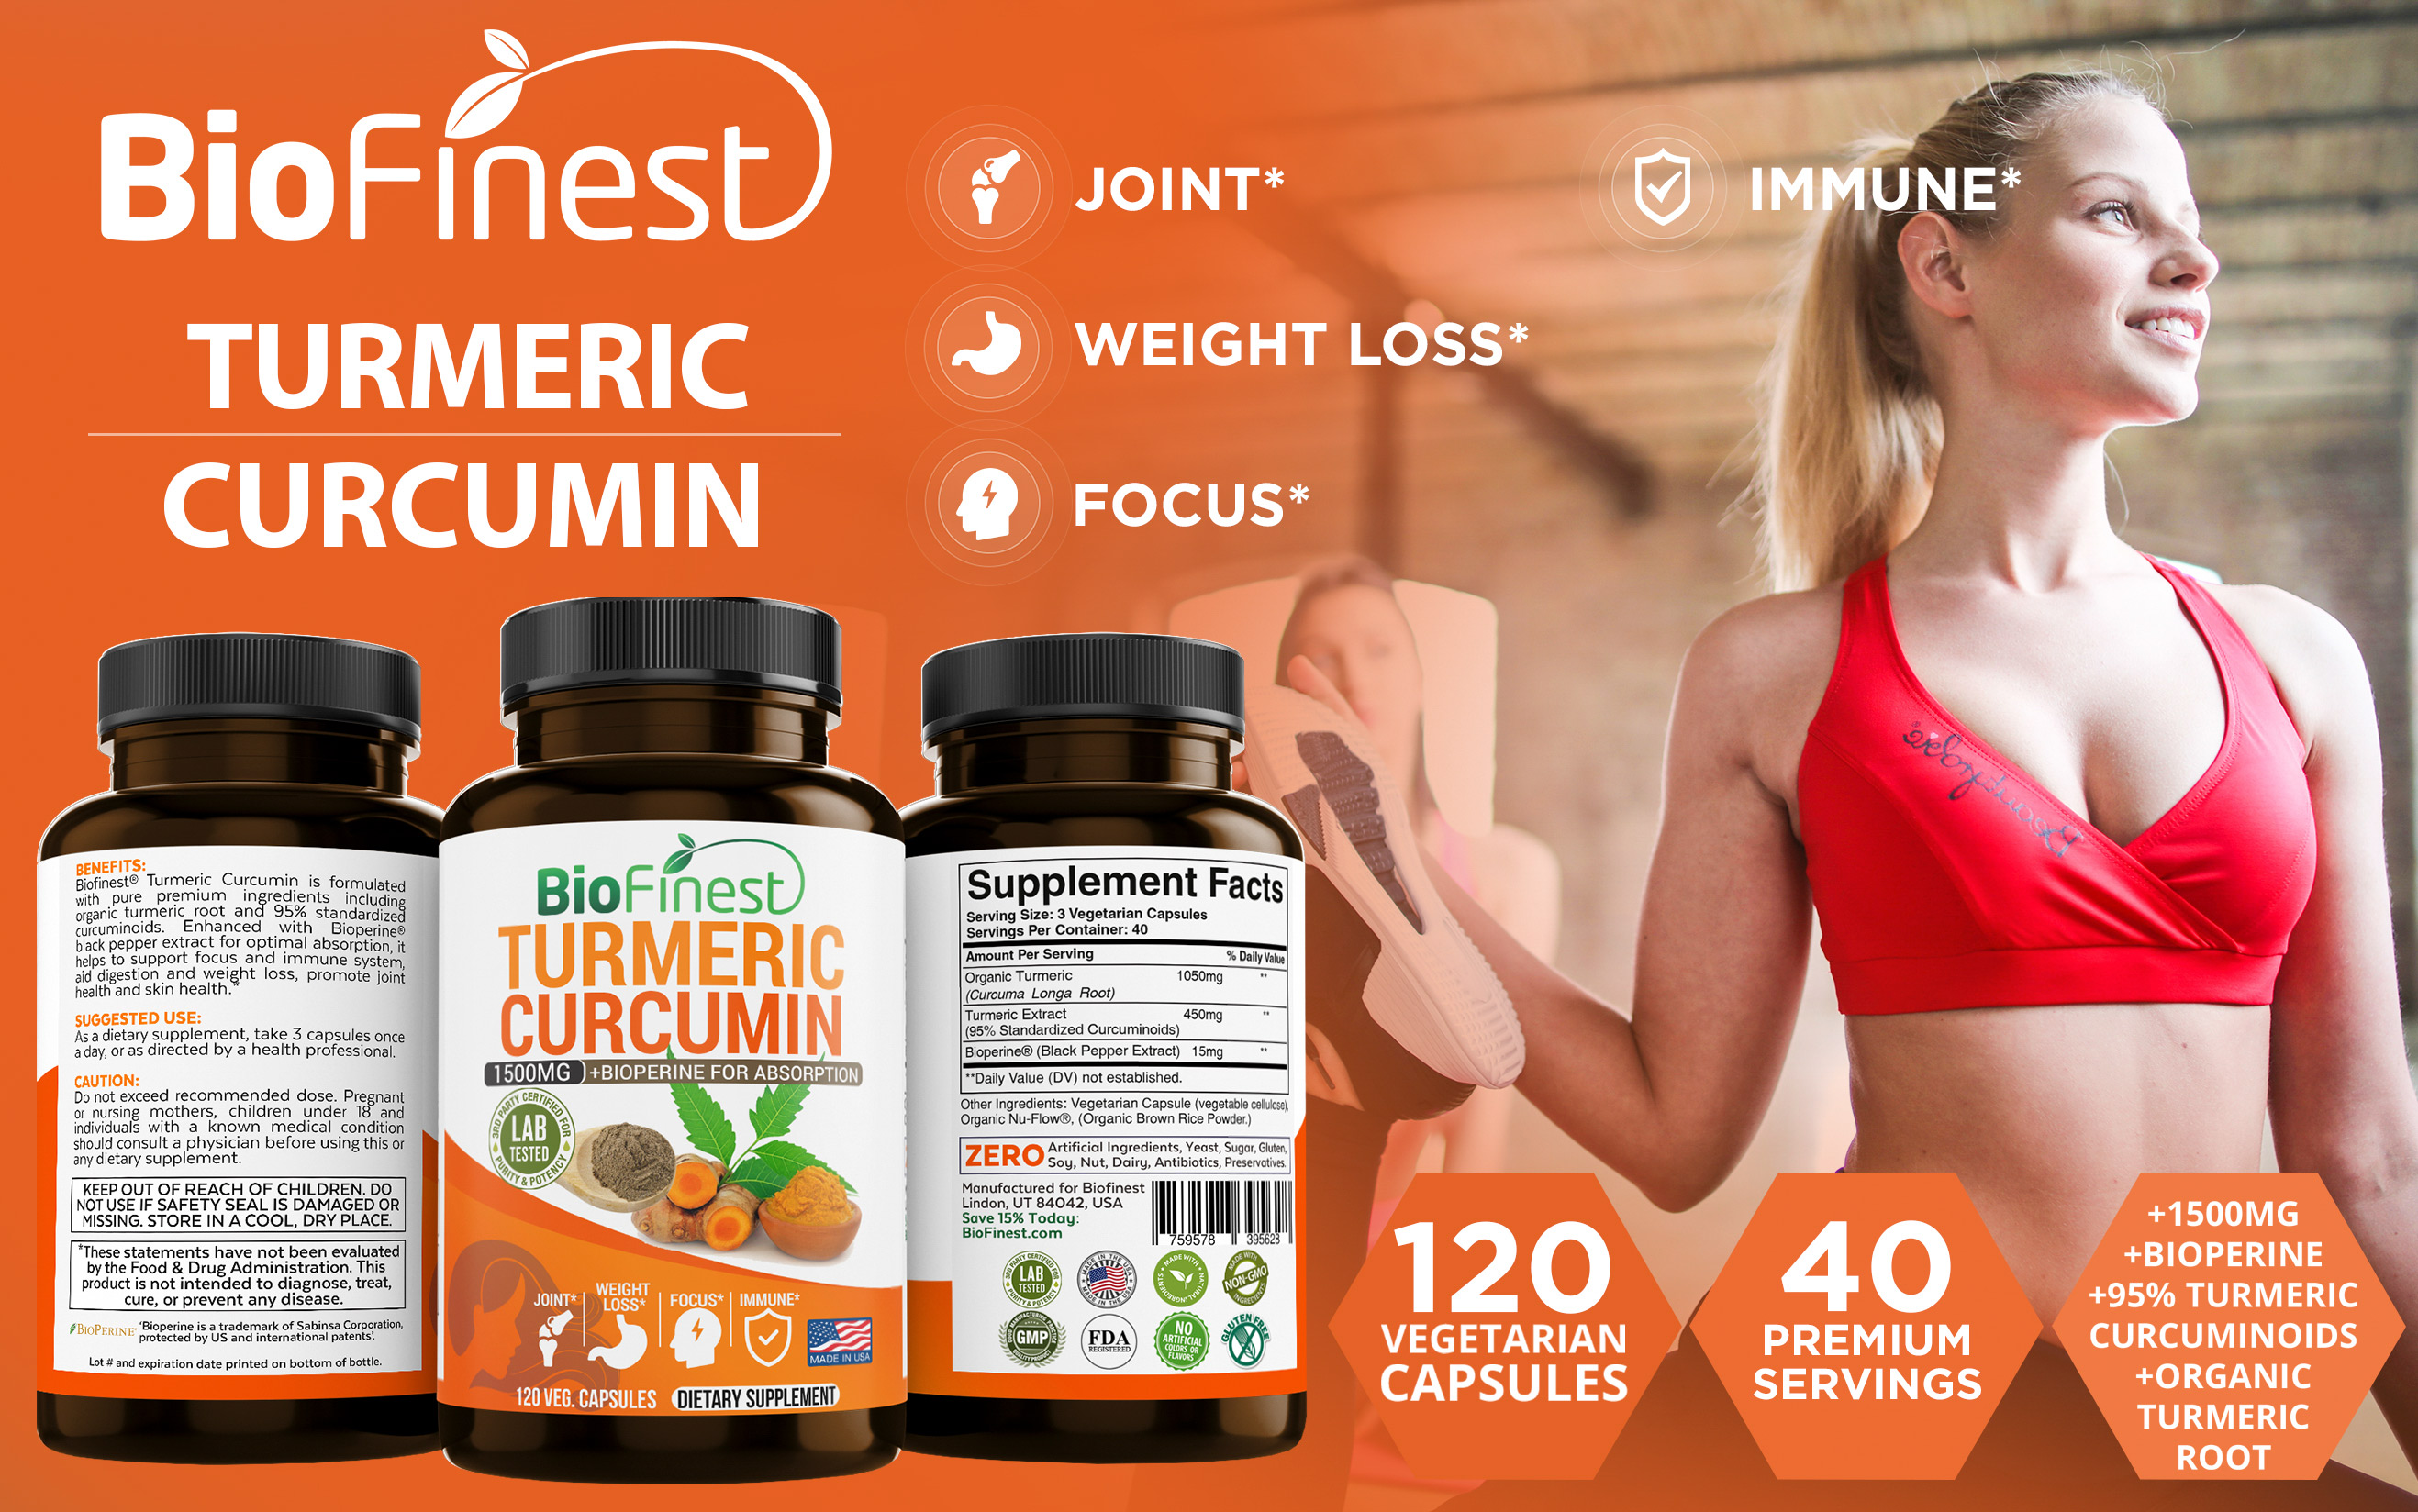 ⭐ ️PREMIUM TURMERIC CURCUMIN - We take great pride in being able to offer t...